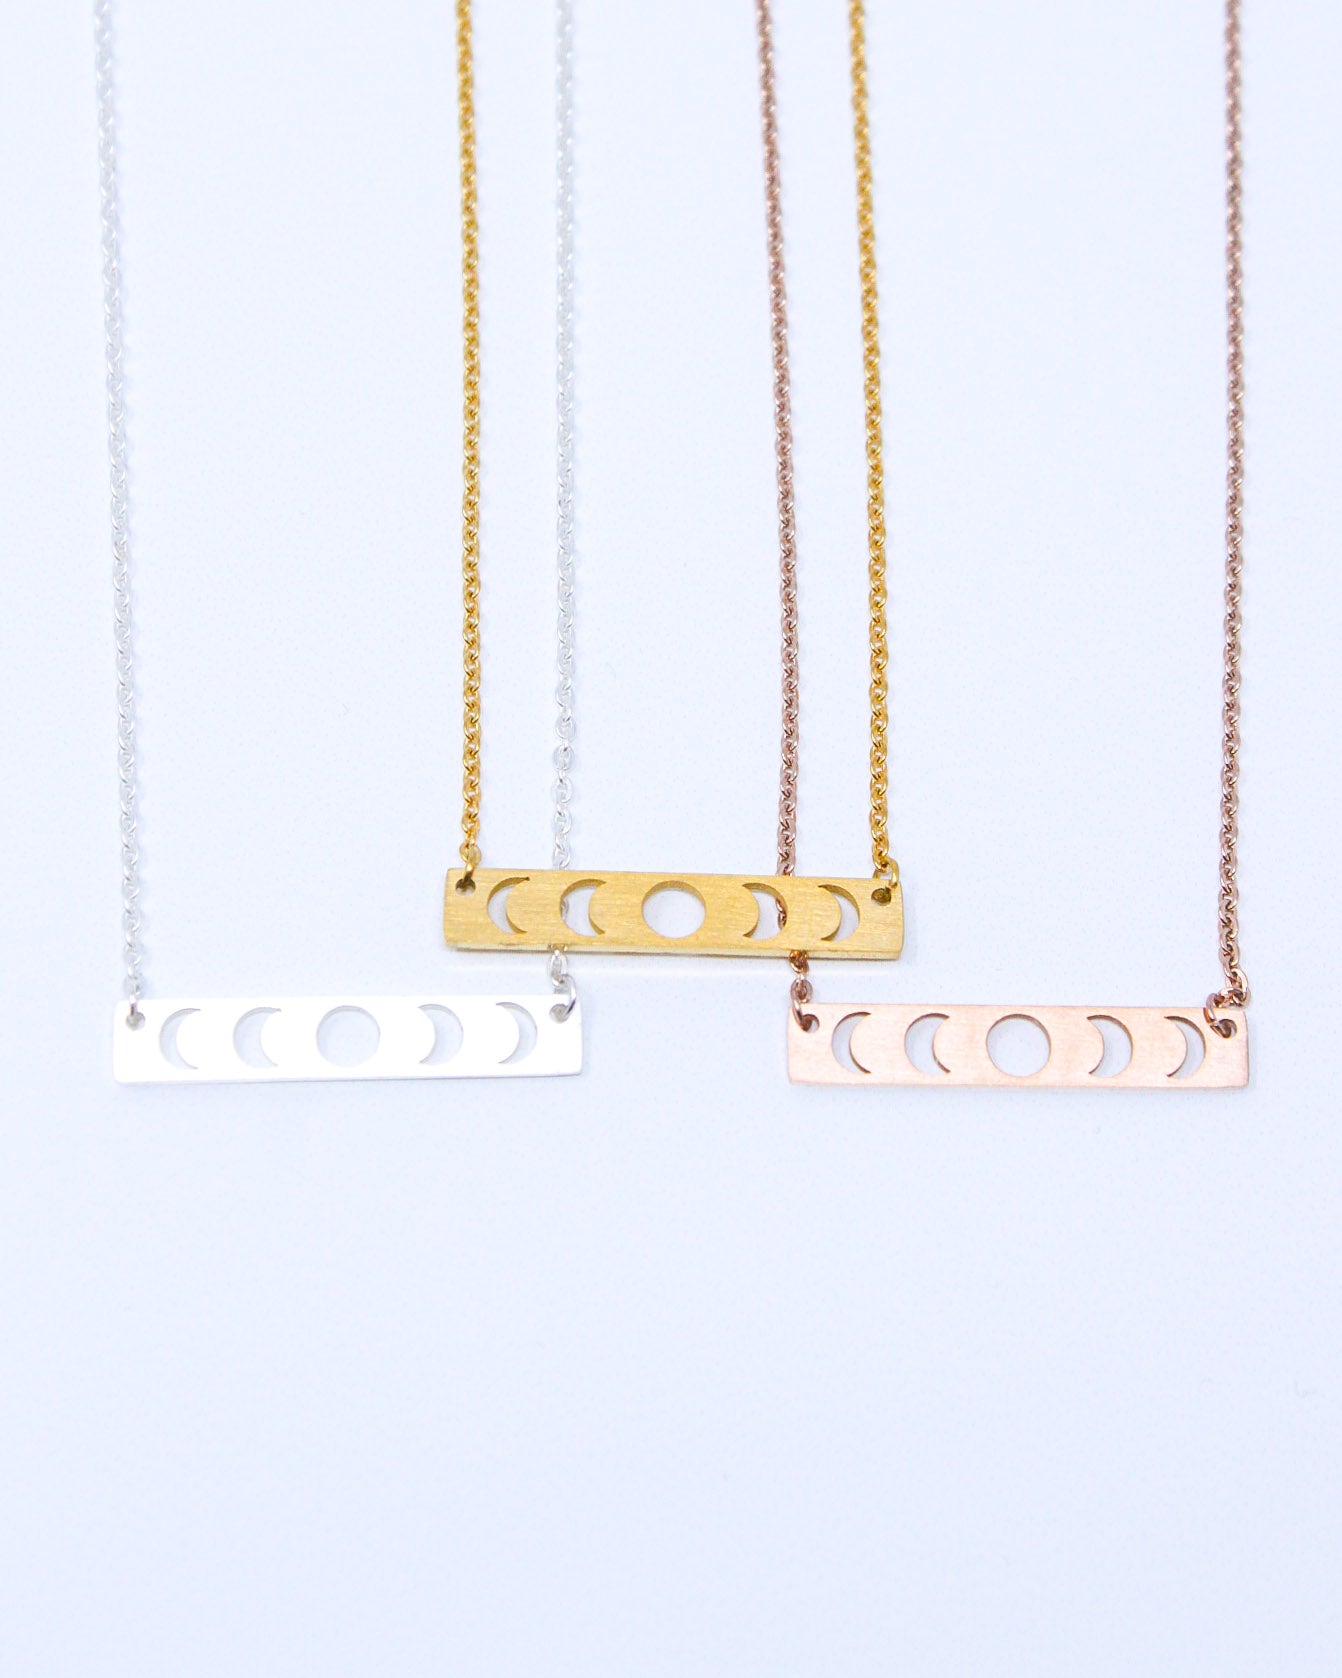 Moon Phase Cutout Necklace